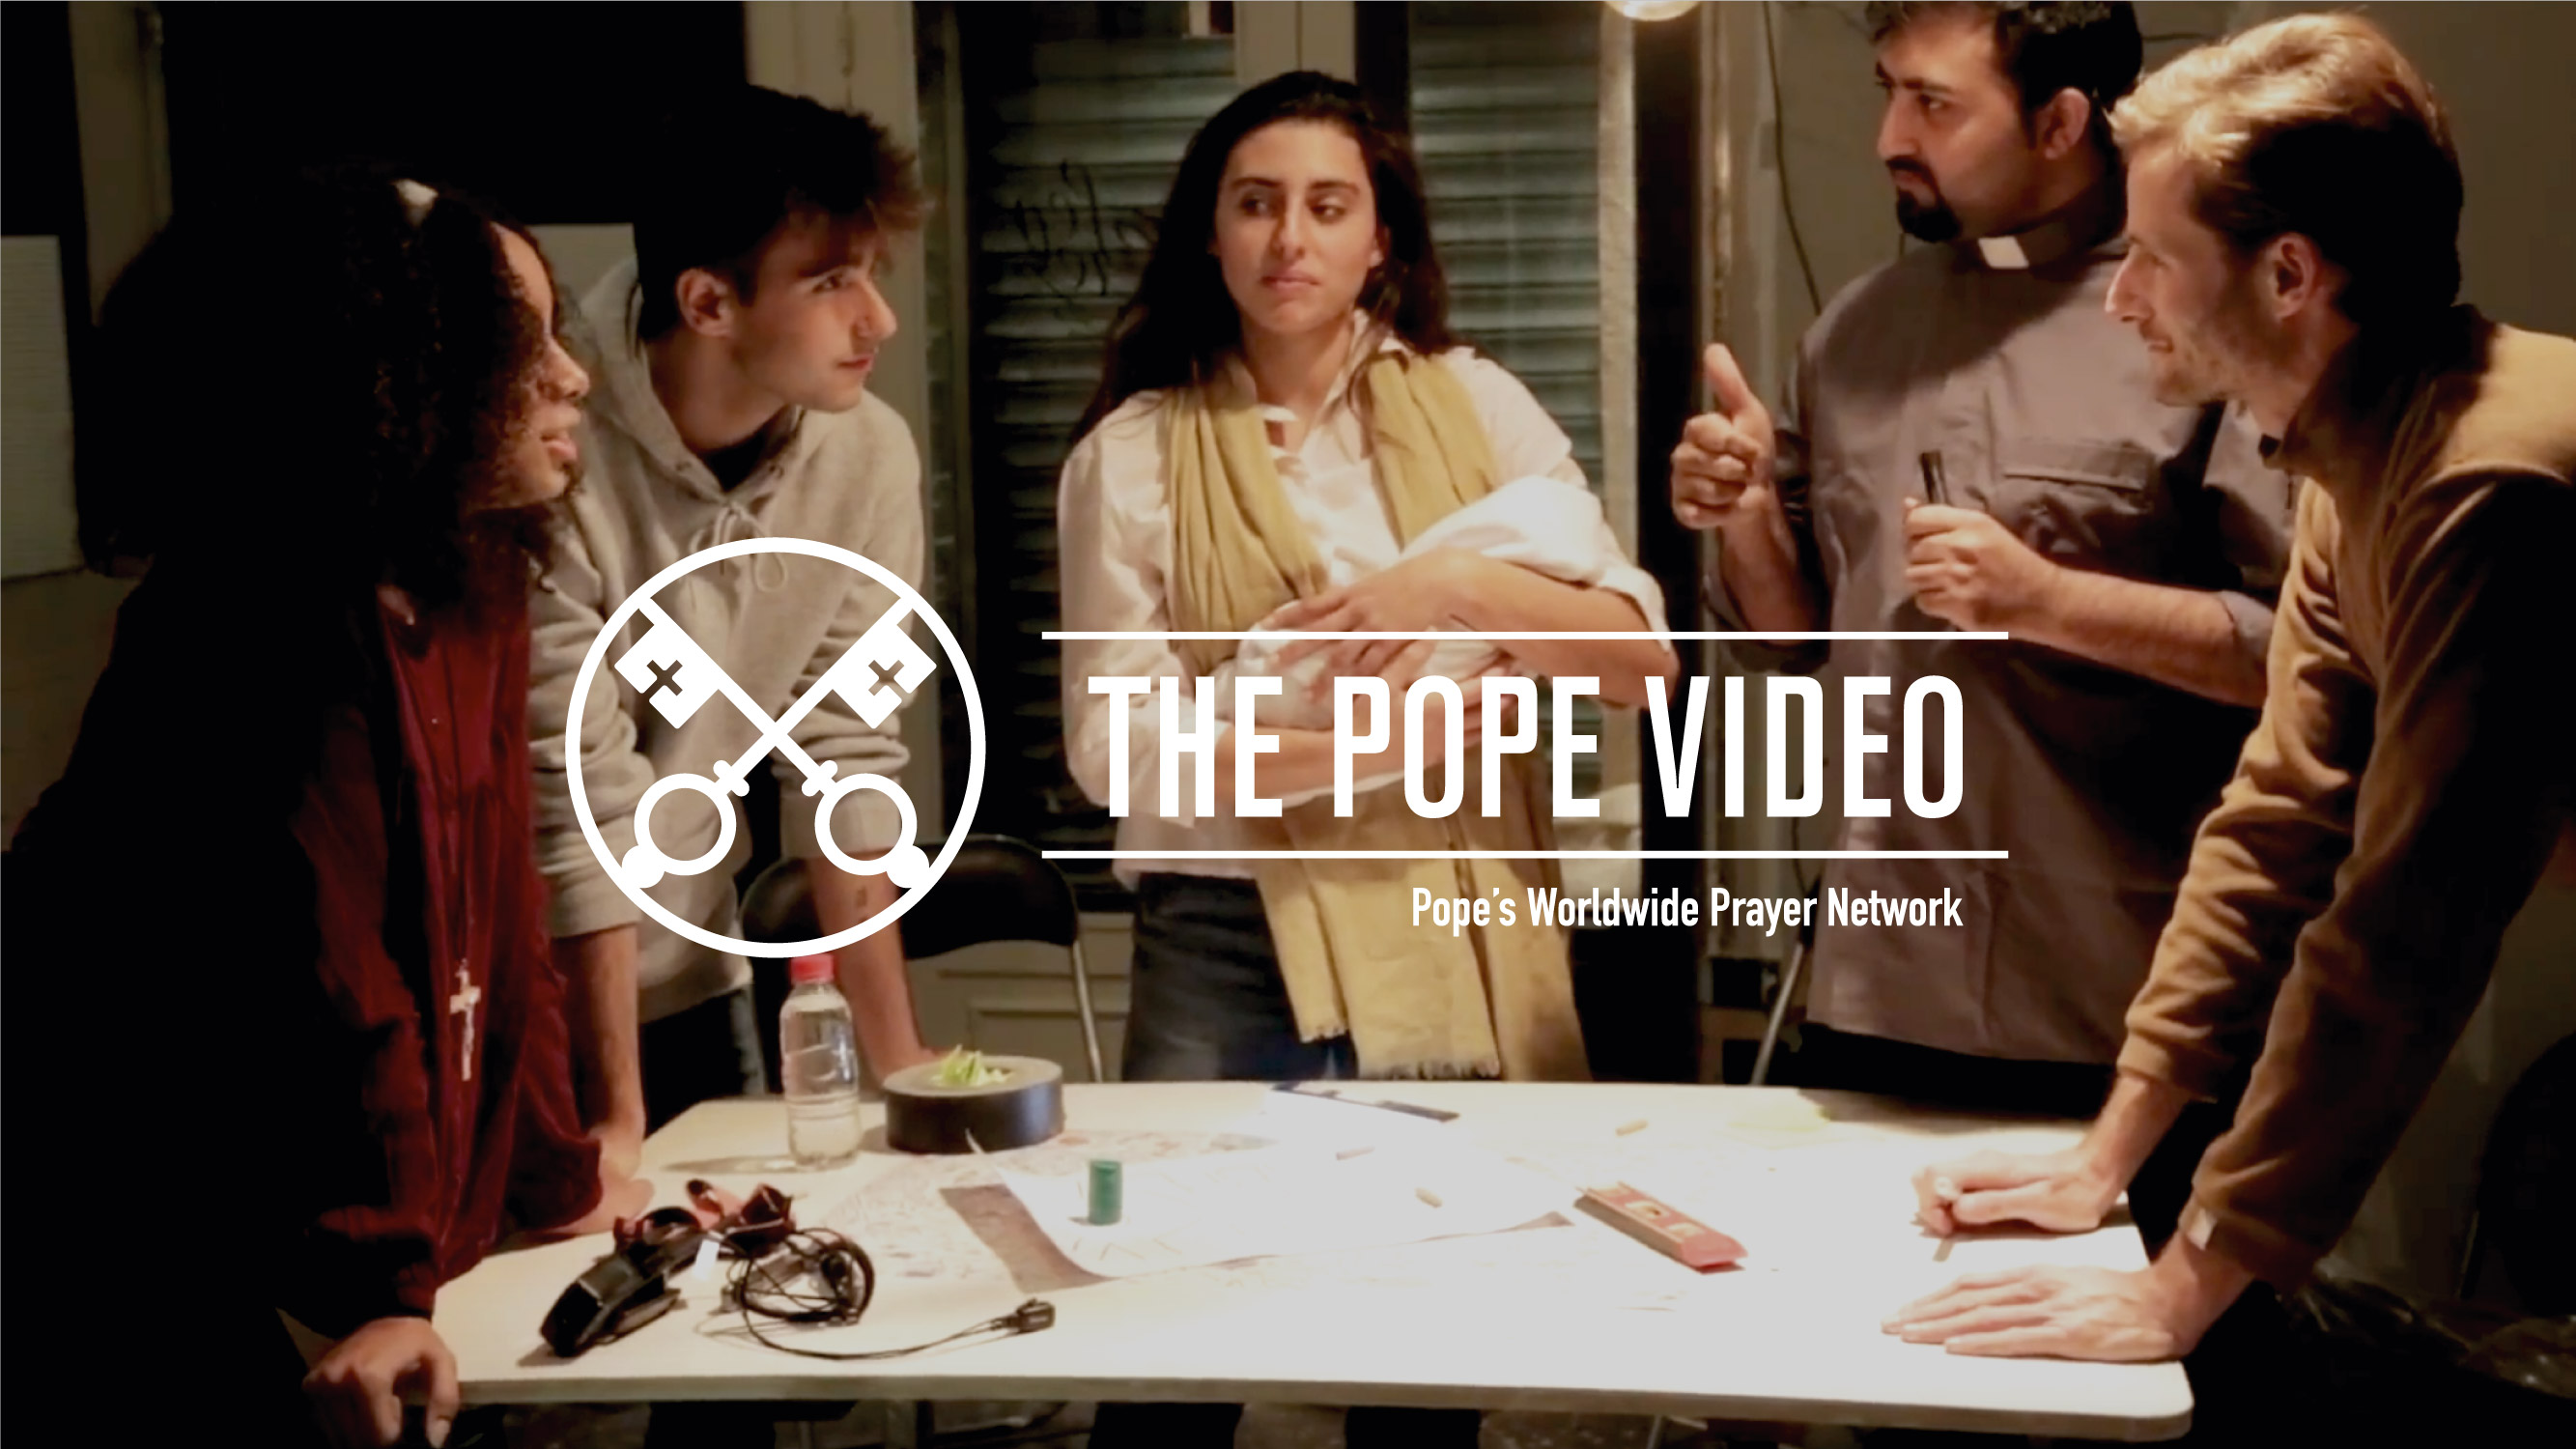 The Pope Video December 2018 (Official Image)